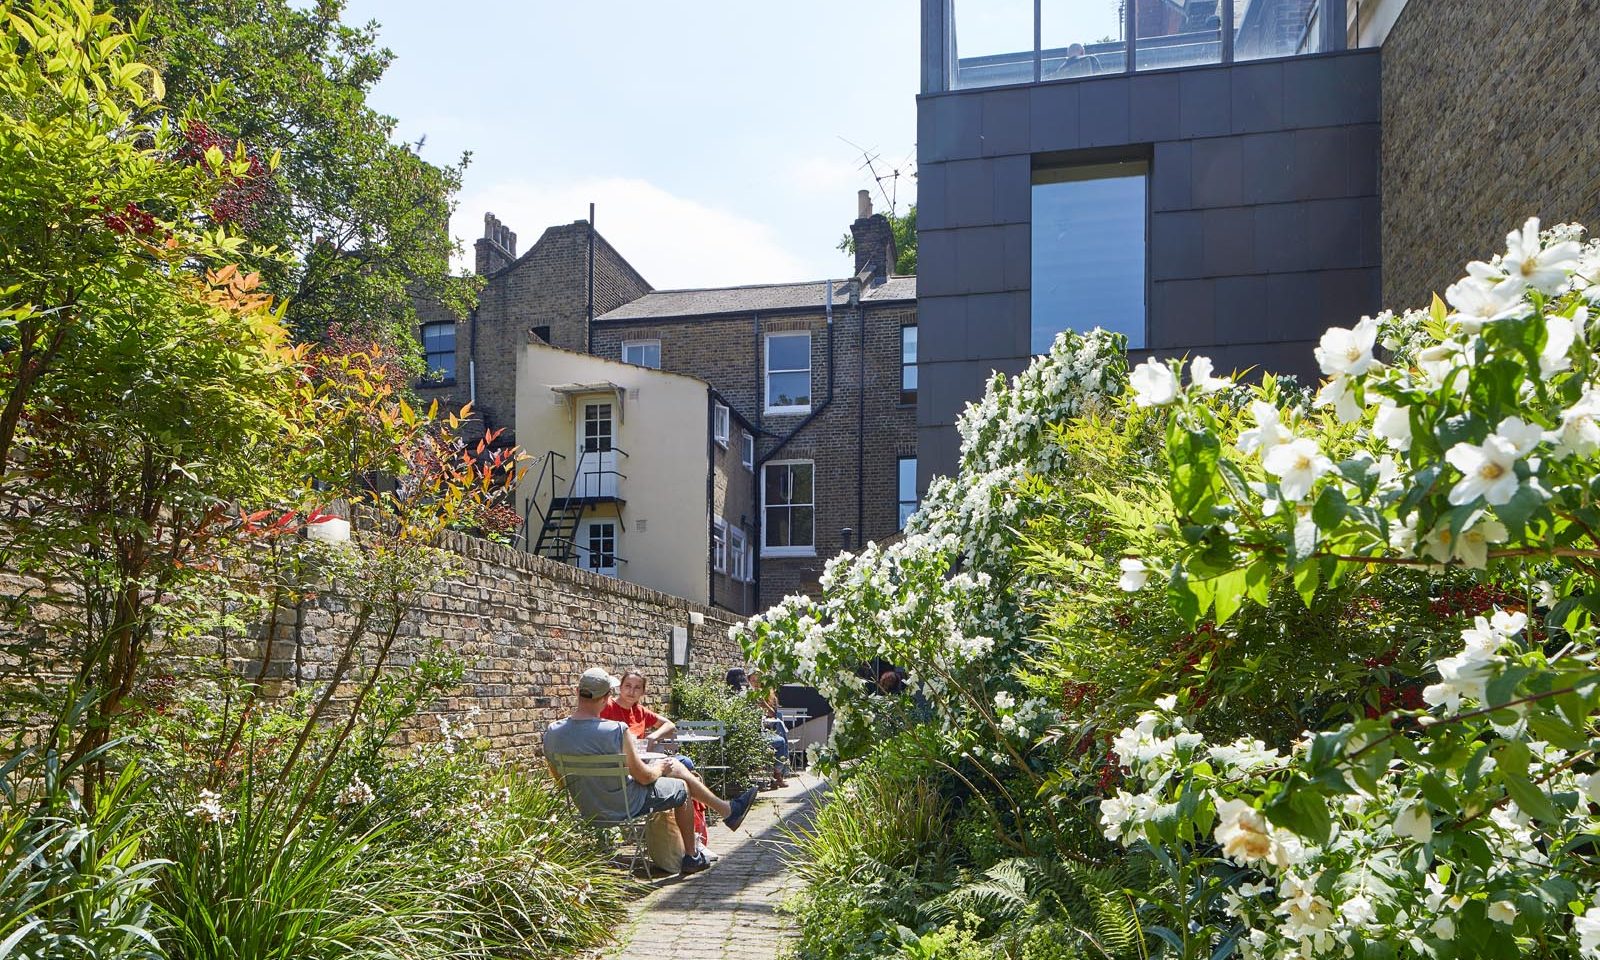 This photo is a view of the SLG's Fox Garden, it shows bushes and plants in the foreground, a person sitting on a chair in the mid-ground and the building of the gallery in the background.